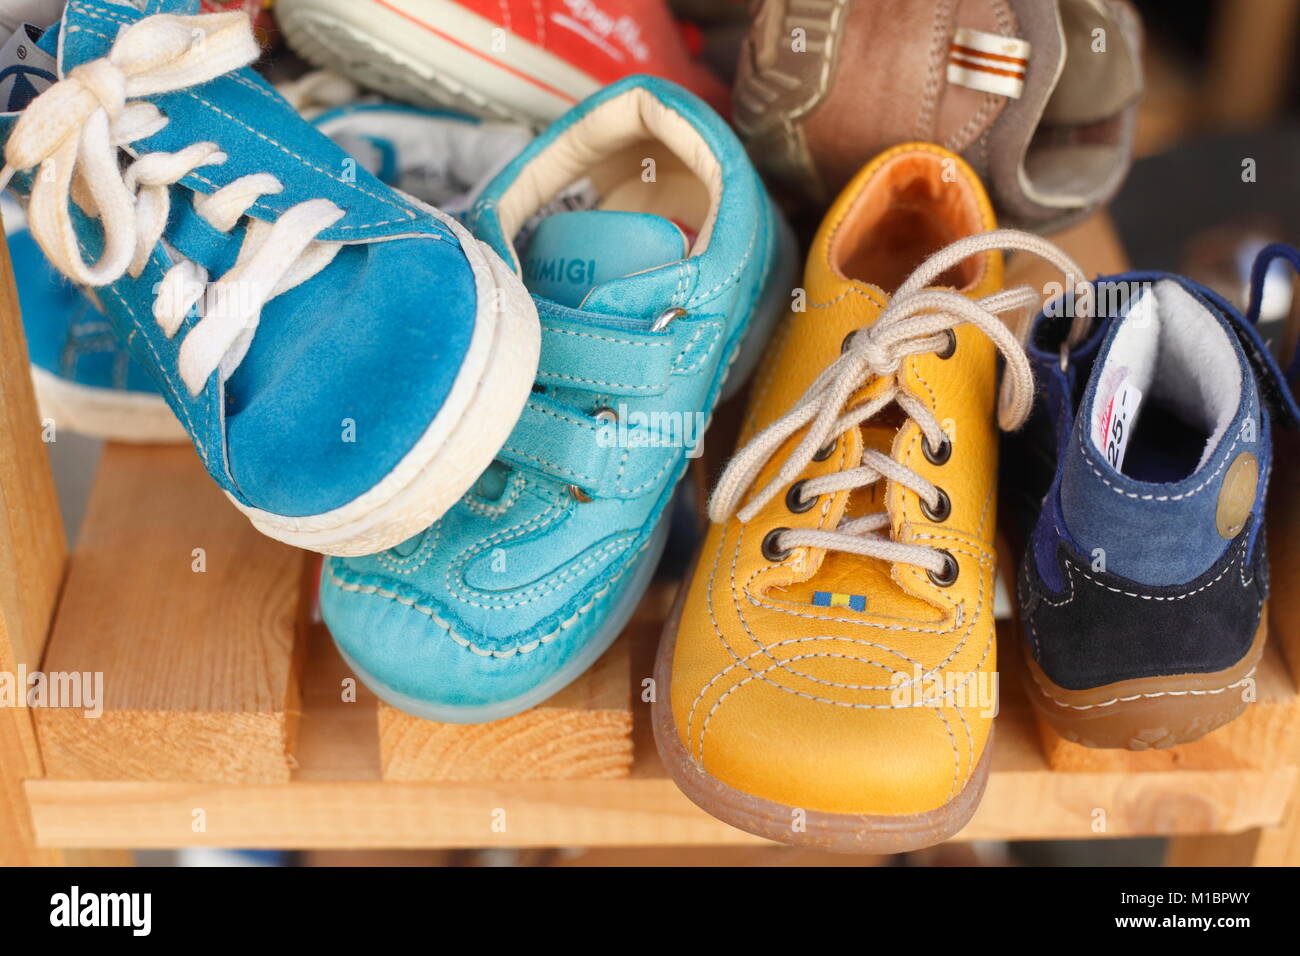 Children's shoes in a shelf, Germany Stock Photo